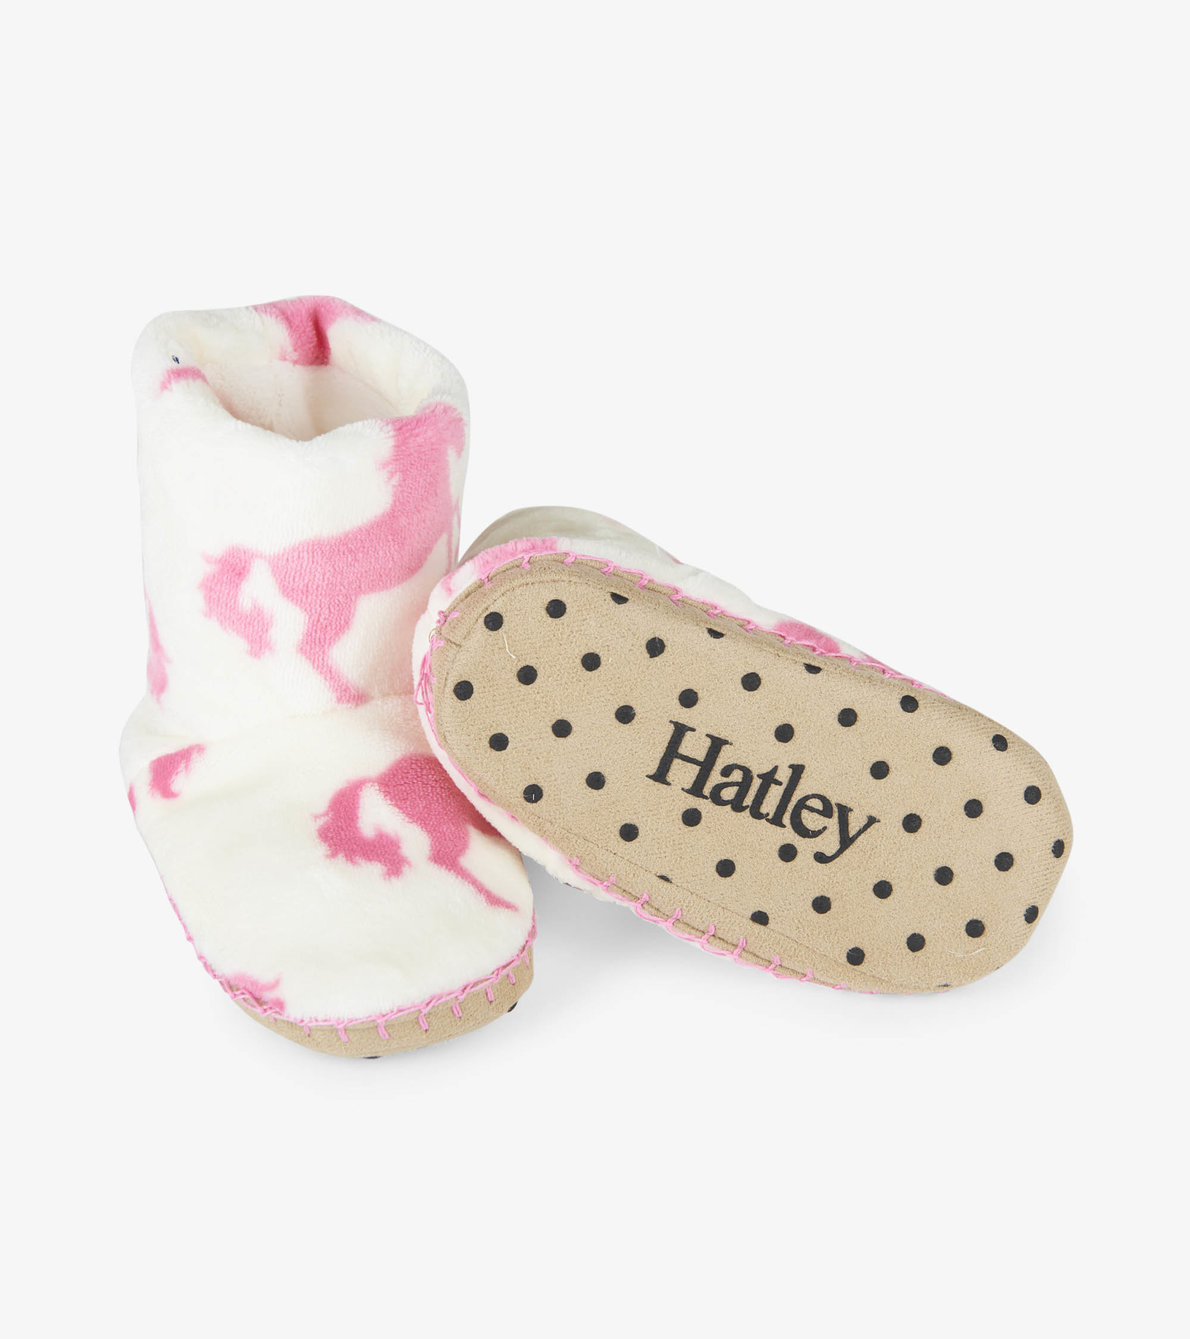 View larger image of Playful Horses Fleece Slippers